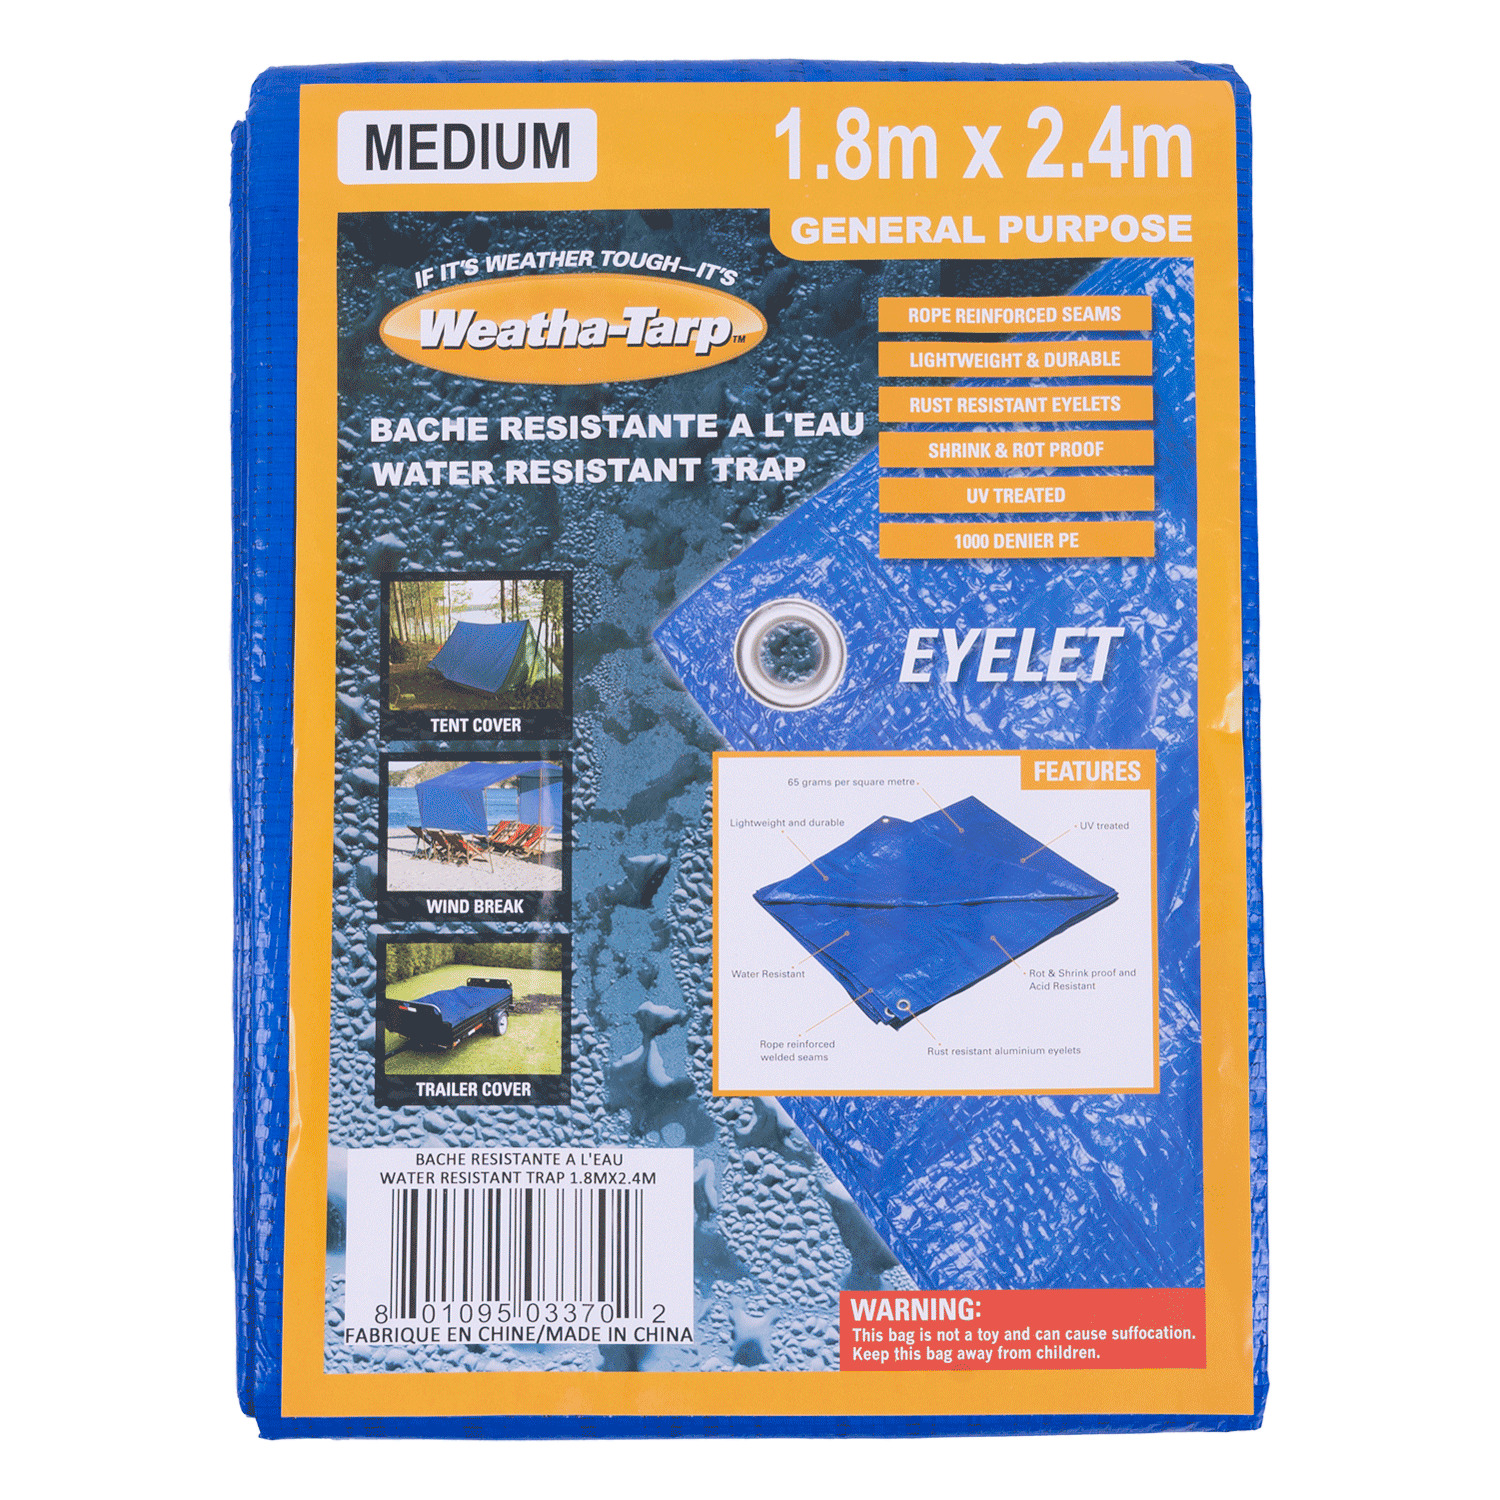 Water-resistant tarp with eyelet - 1.8m x 2.4m